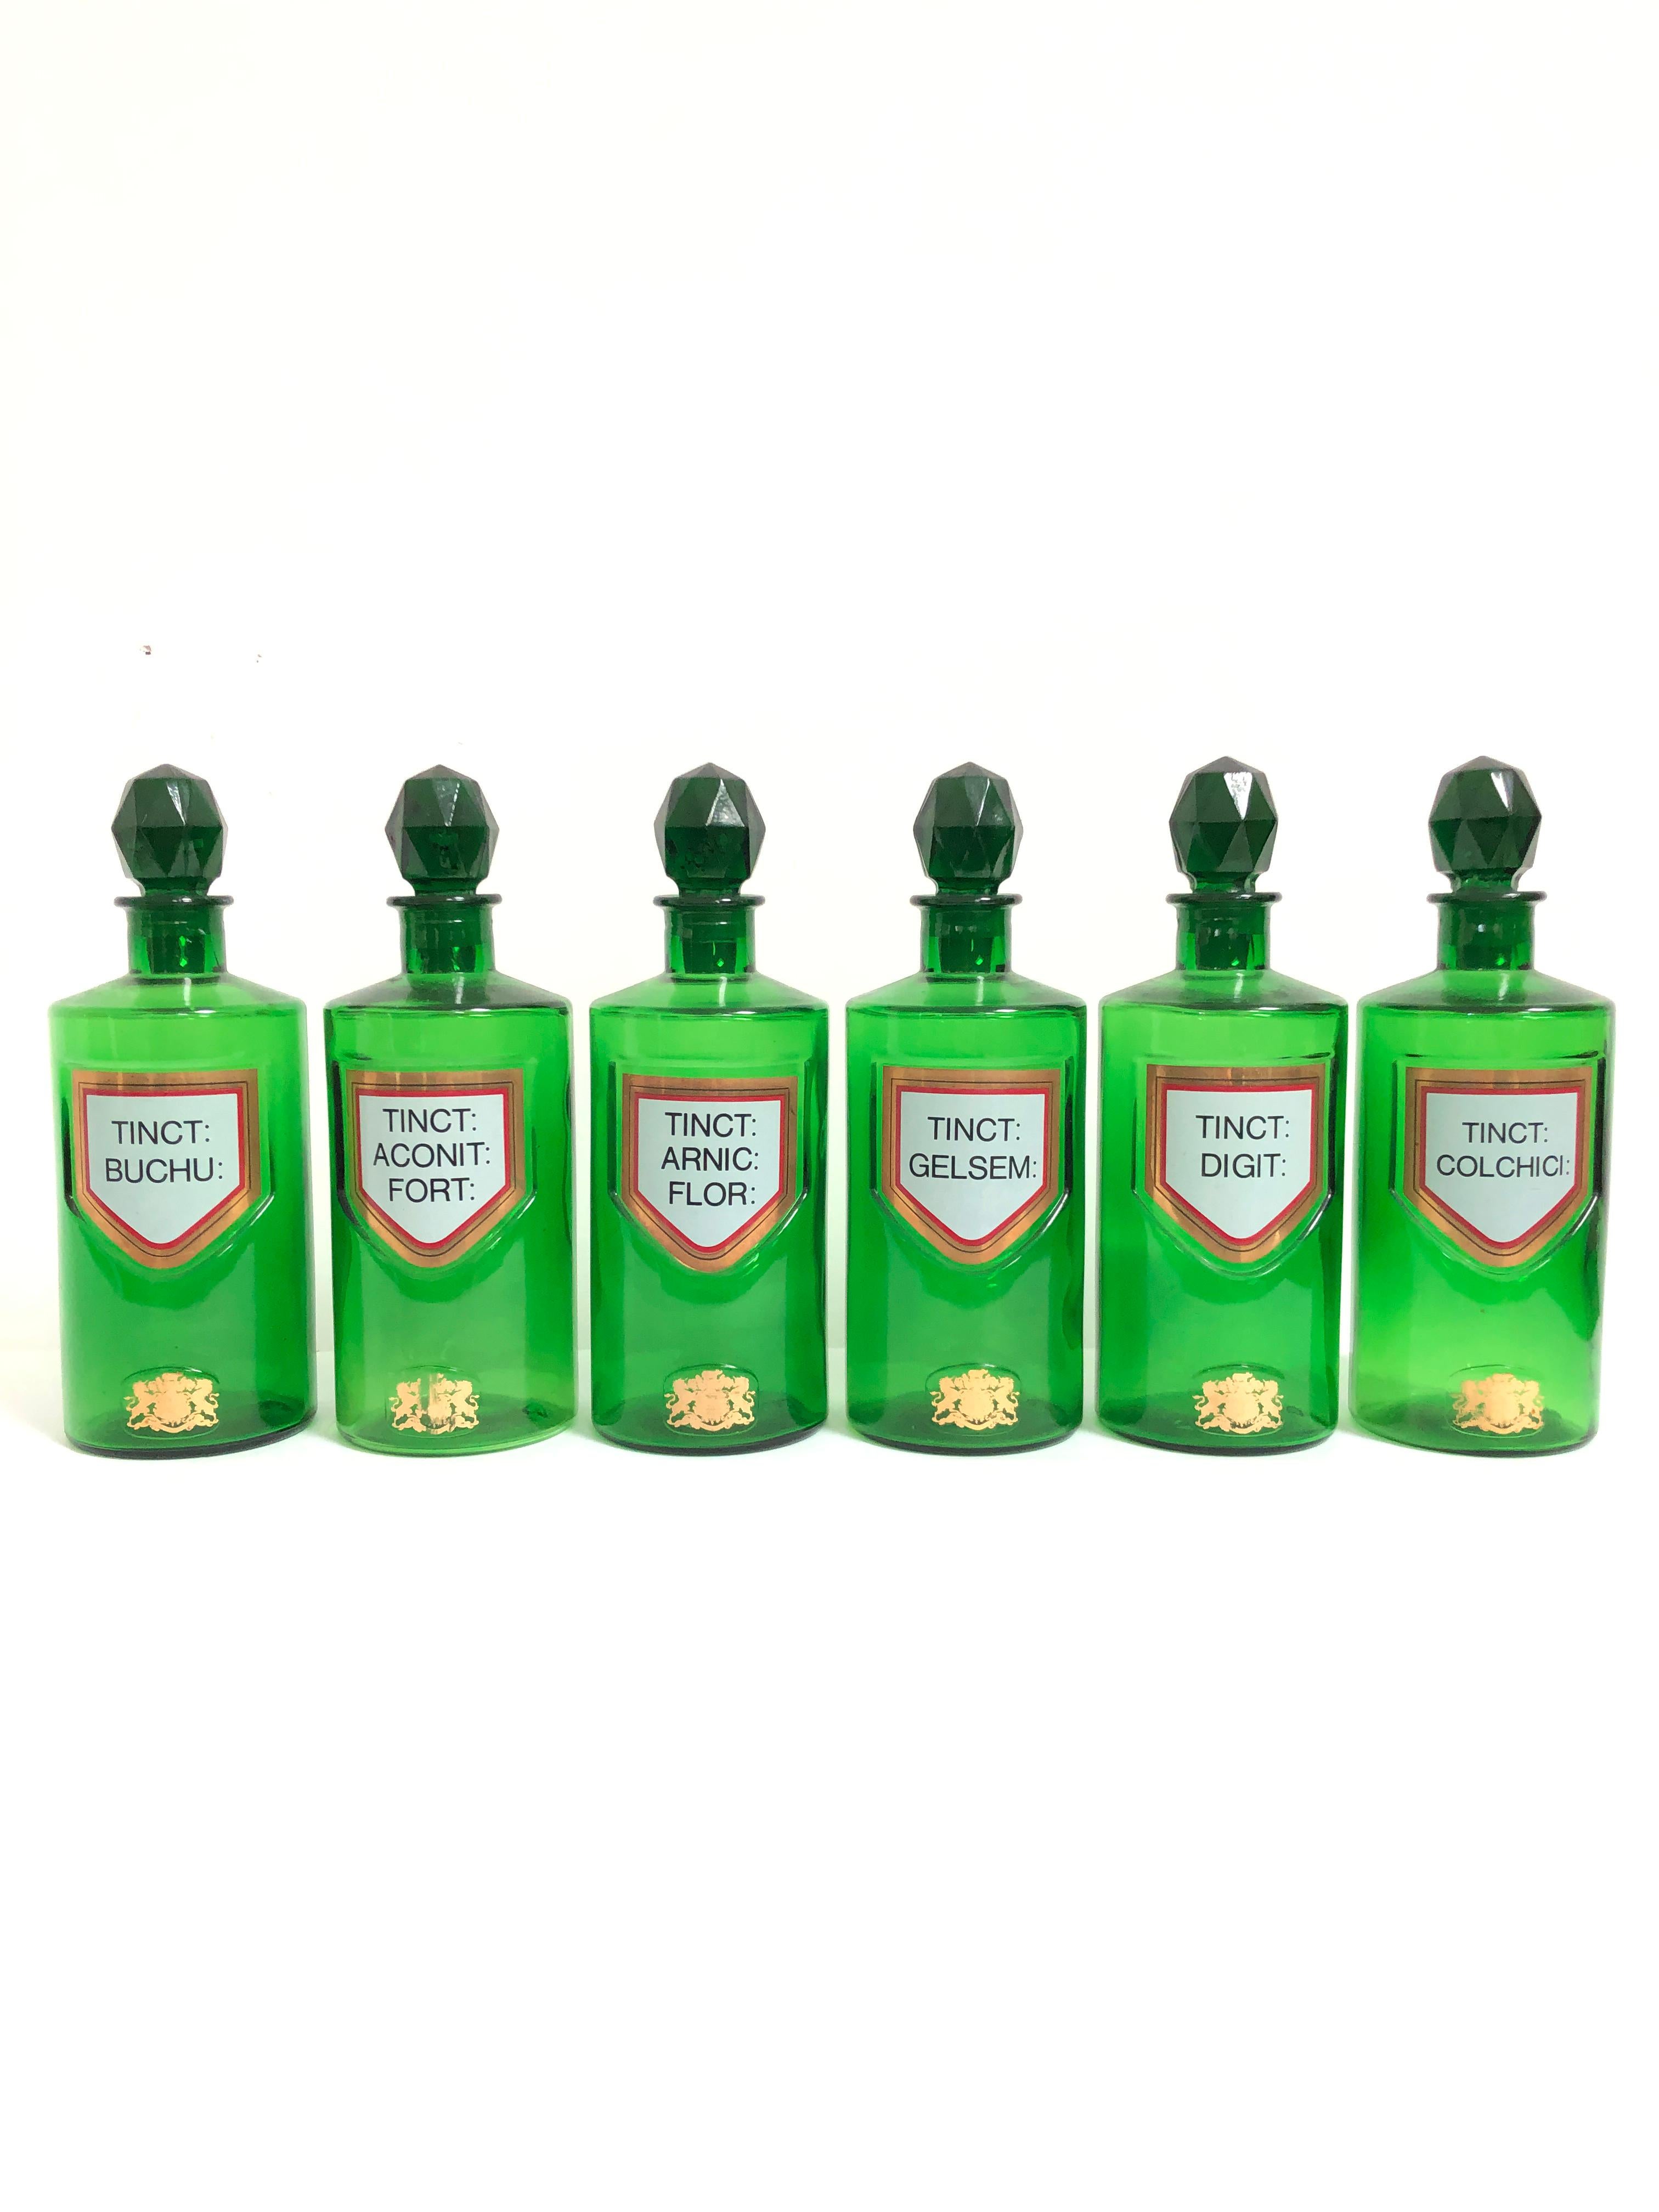 20th Century Collection Vintage Apothecary Royal Pharmaceutical Society Glass Bottles Bottle